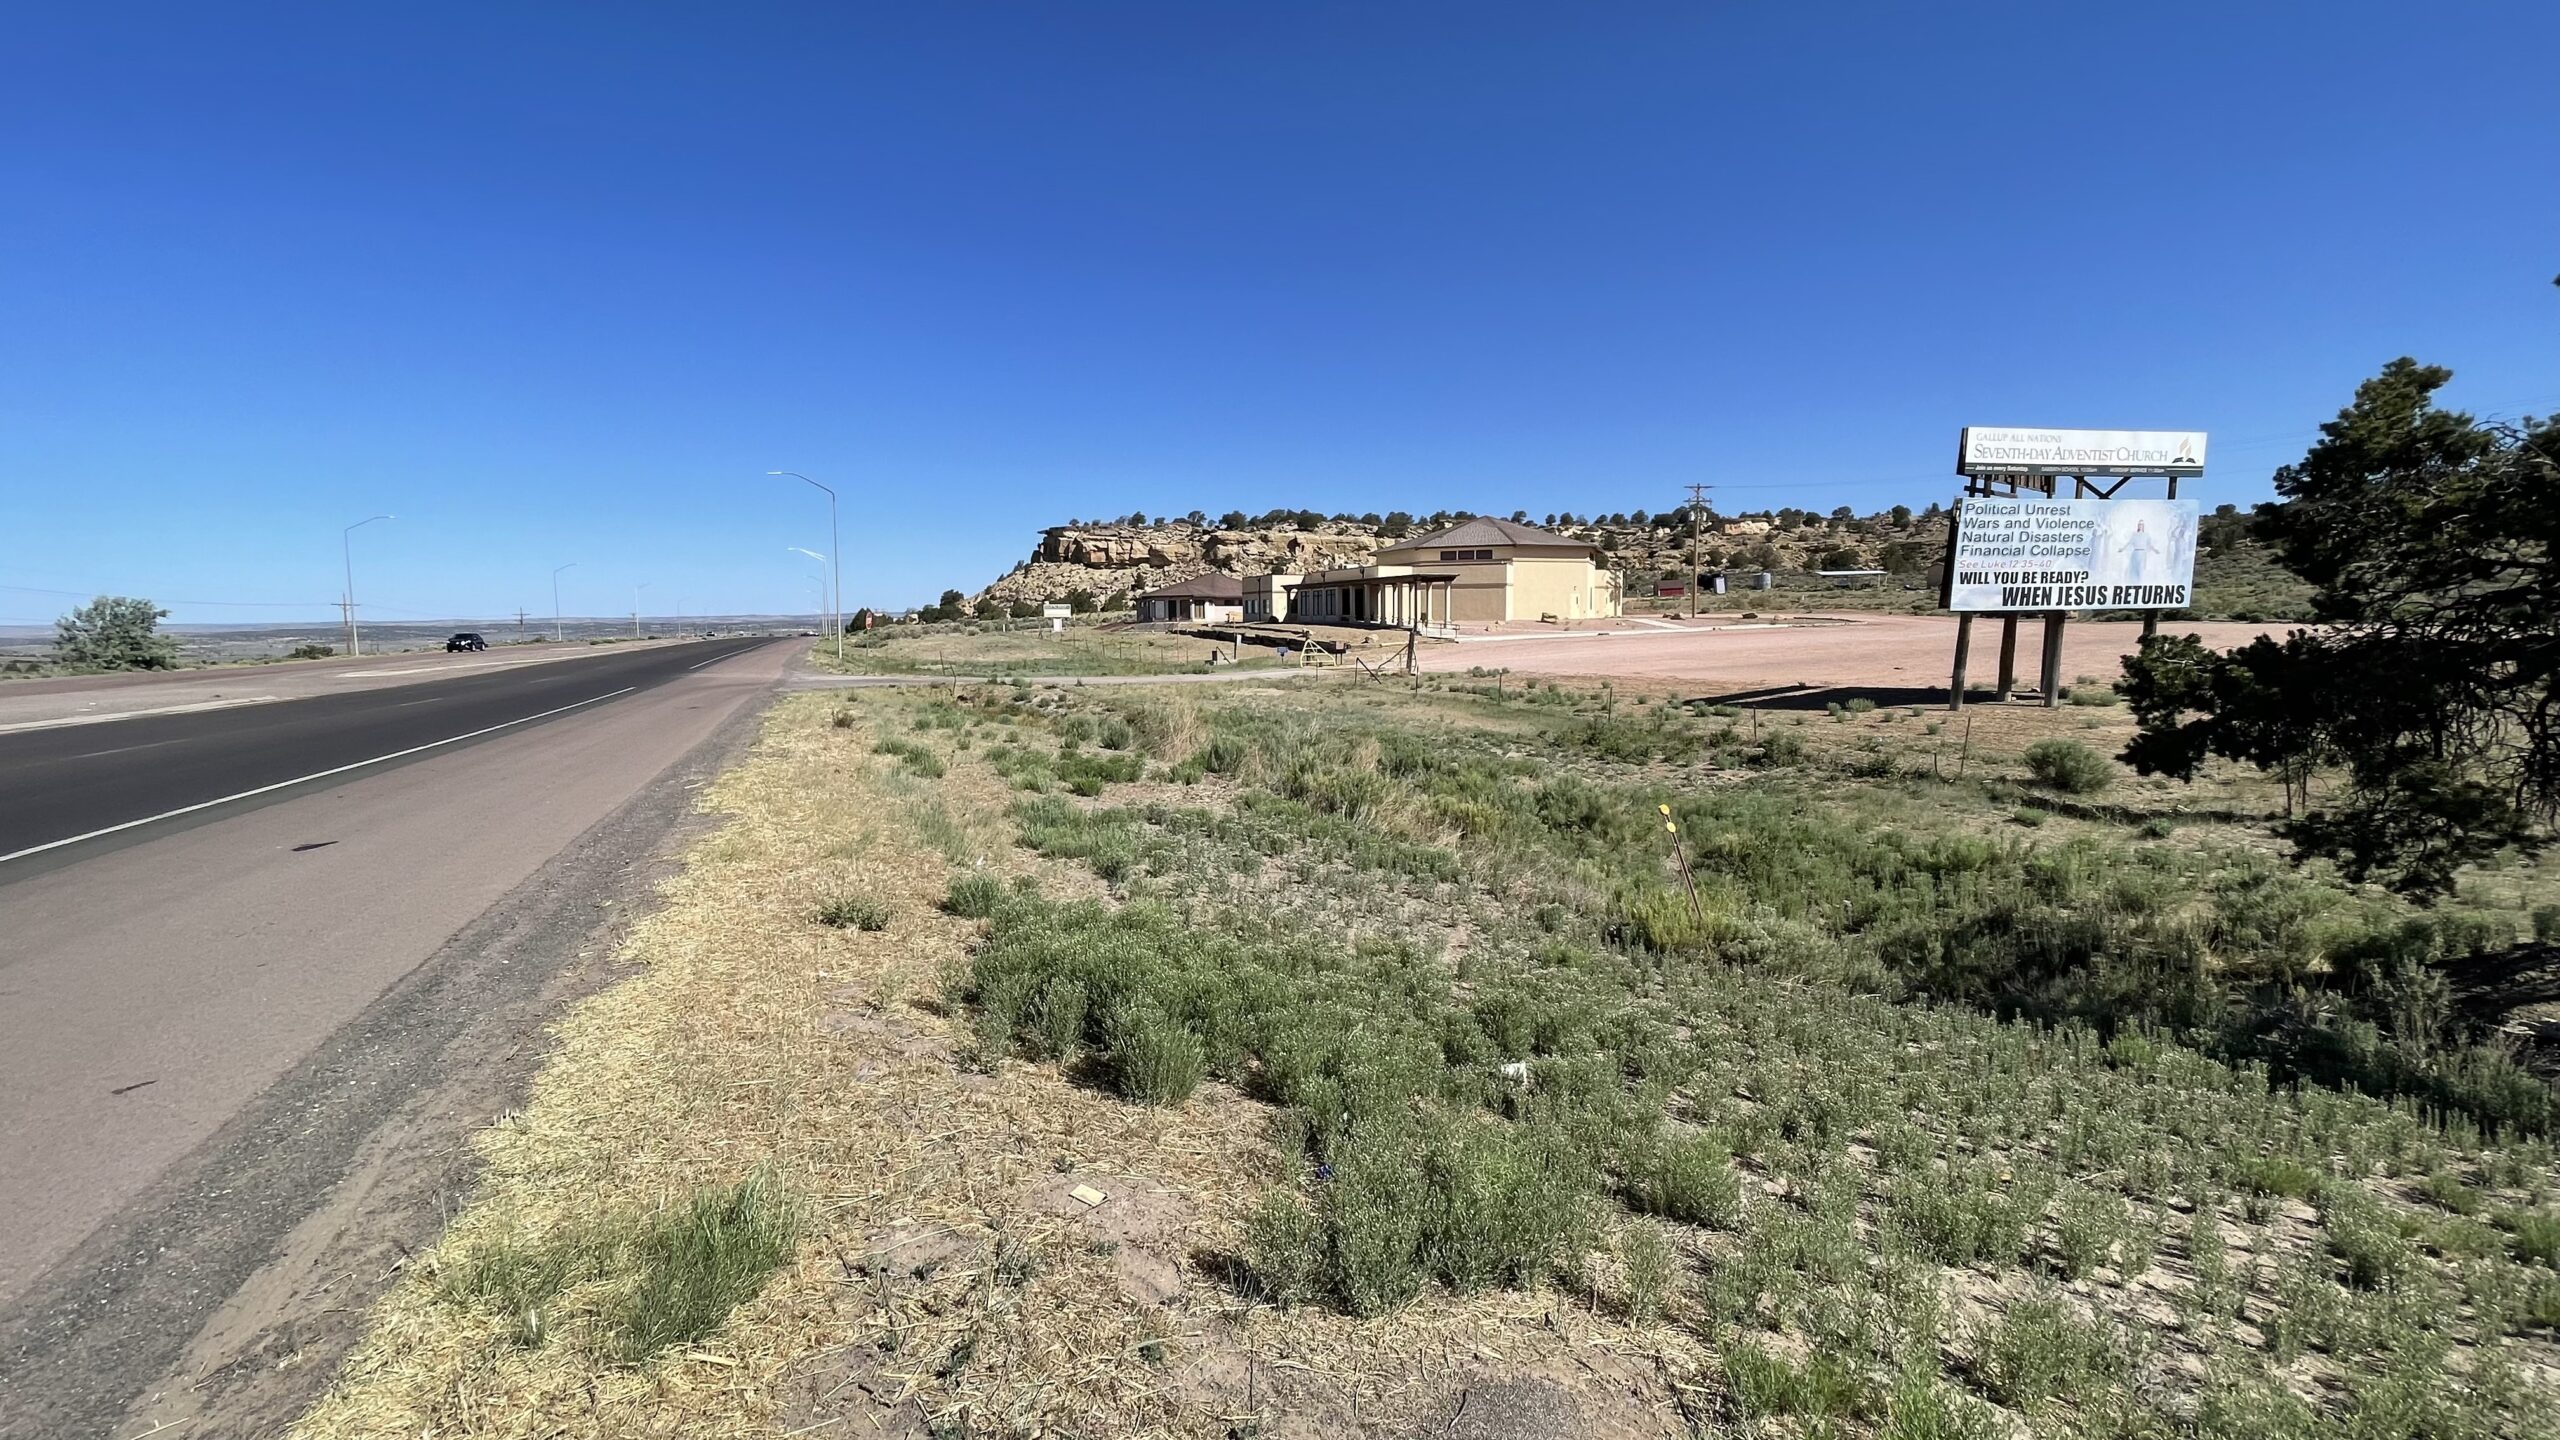 Main road into the Navajo Reservation passing right by the Gallup SDA Church with the church owned Billboard reminding people of Jesus return.